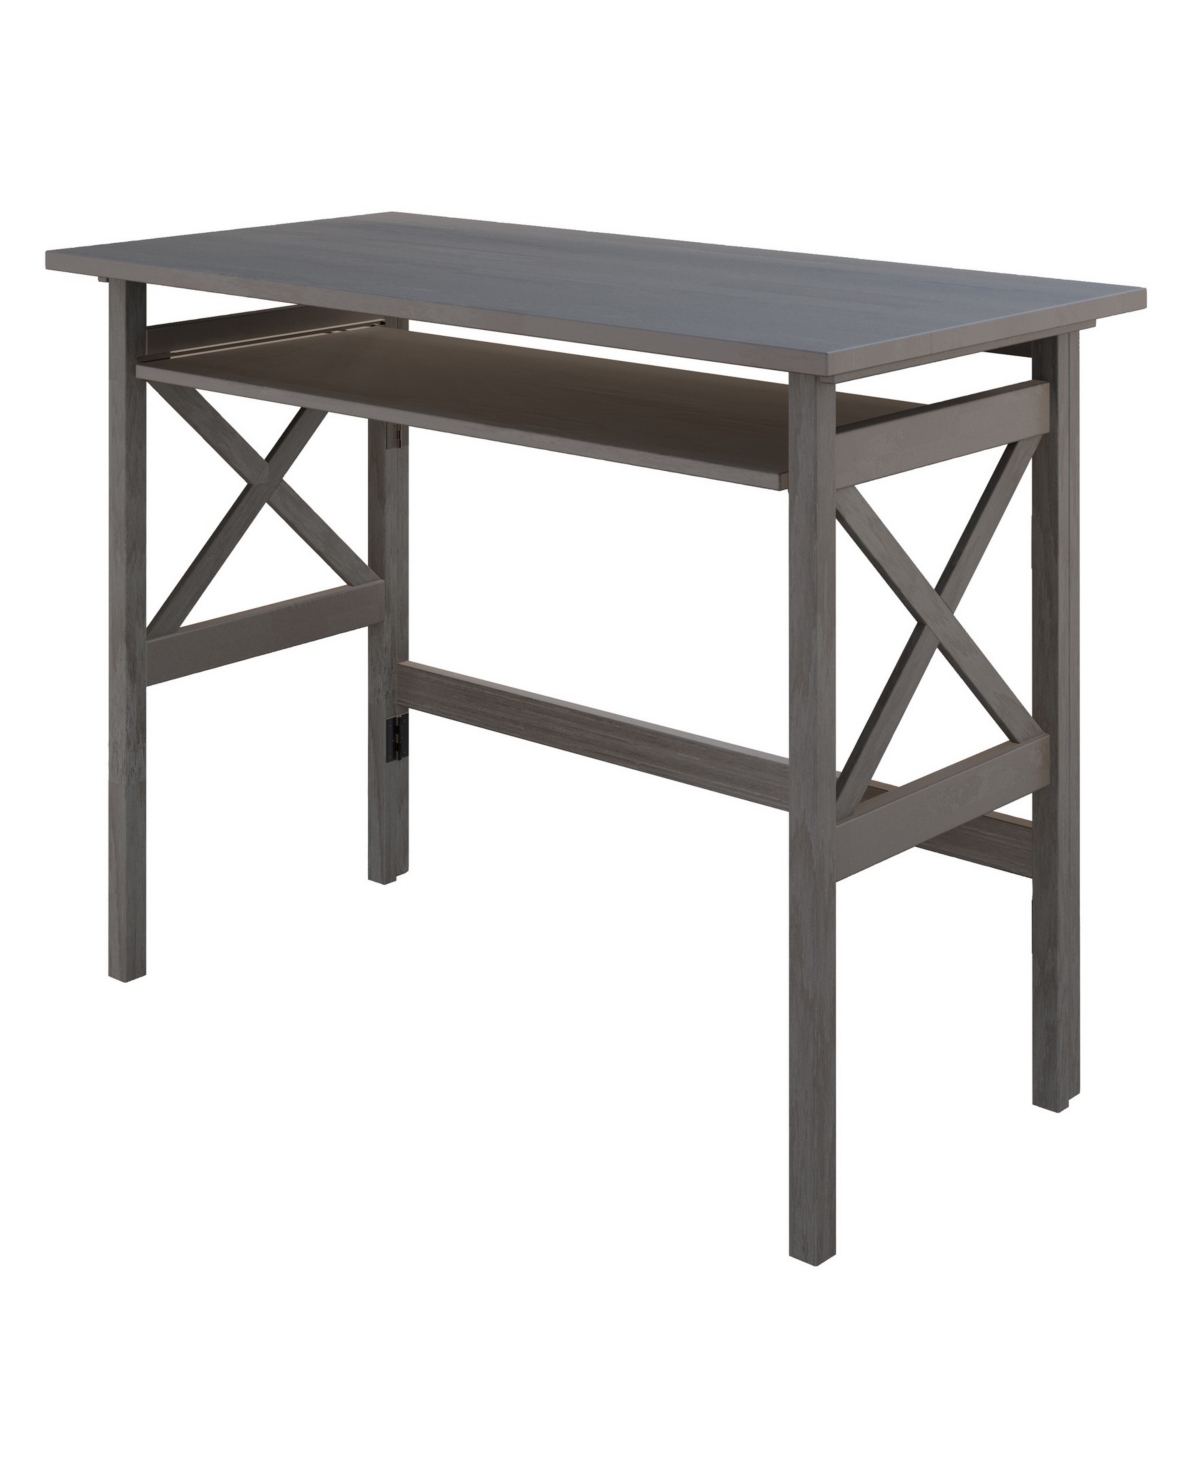 Winsome Xander 30" Wood Foldable Desk In Oyster Gray